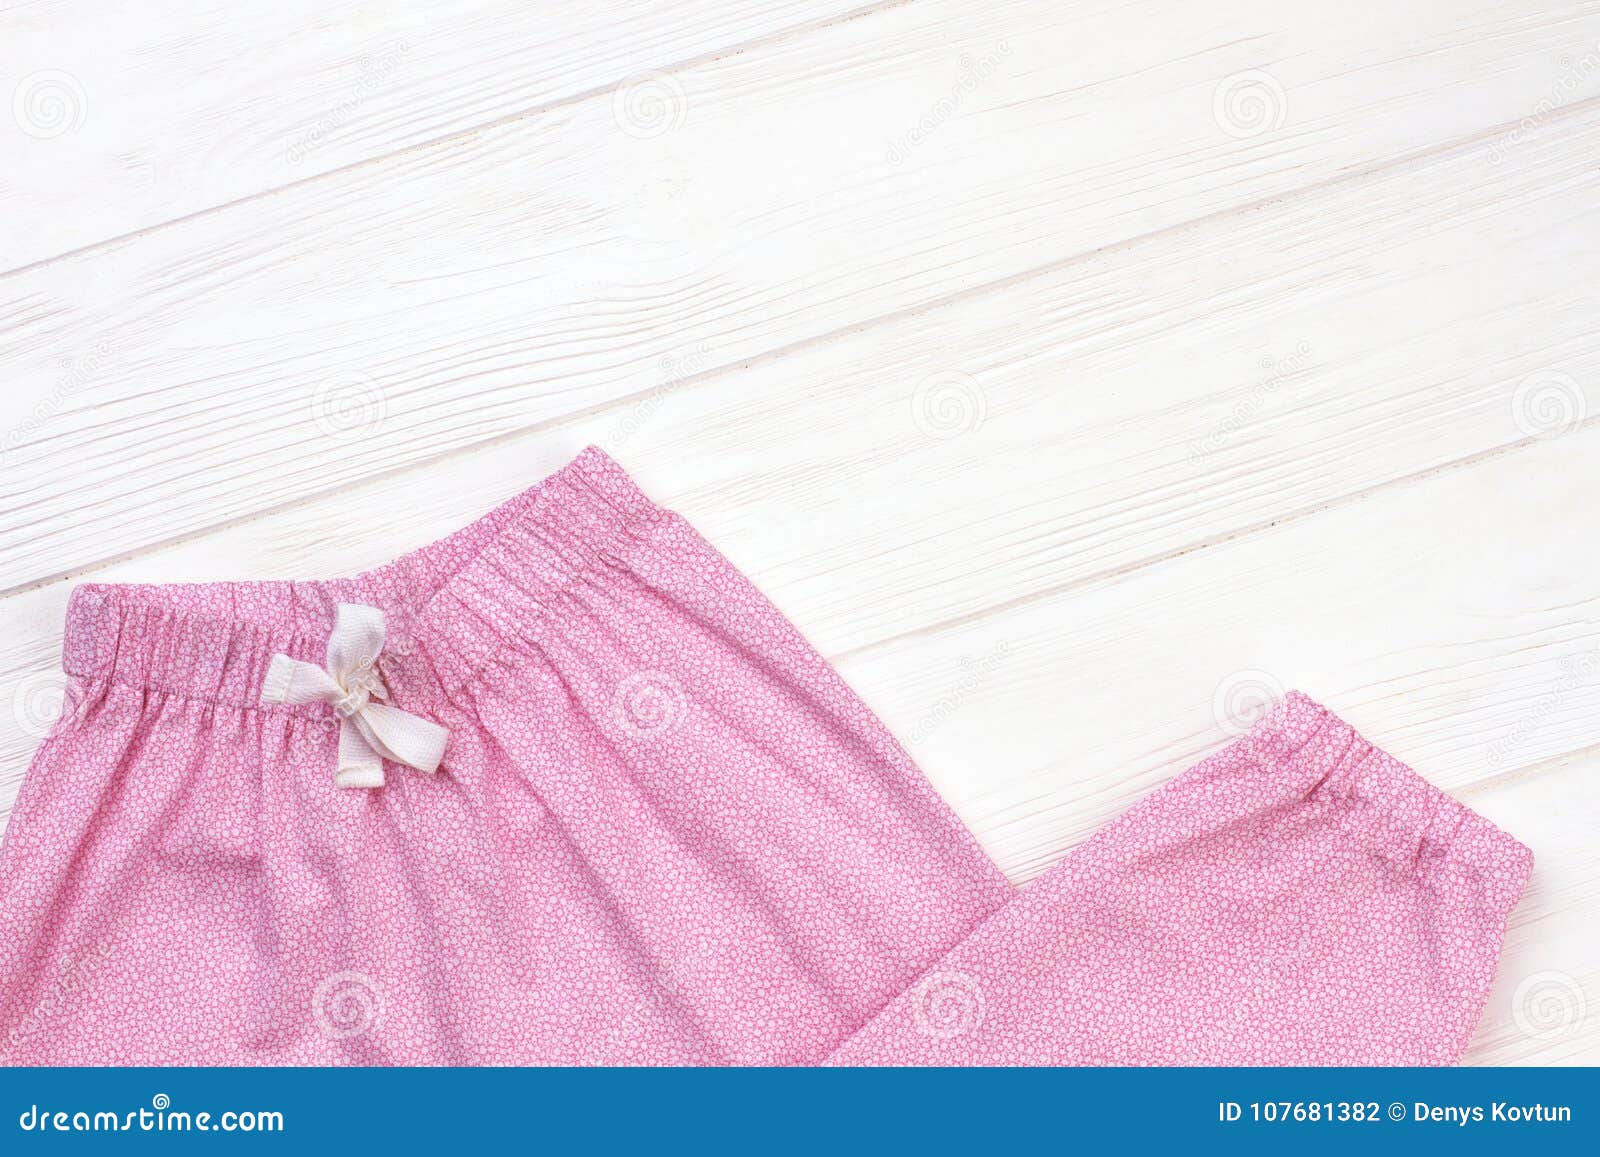 60+ Elastic Waistband Stock Photos, Pictures & Royalty-Free Images